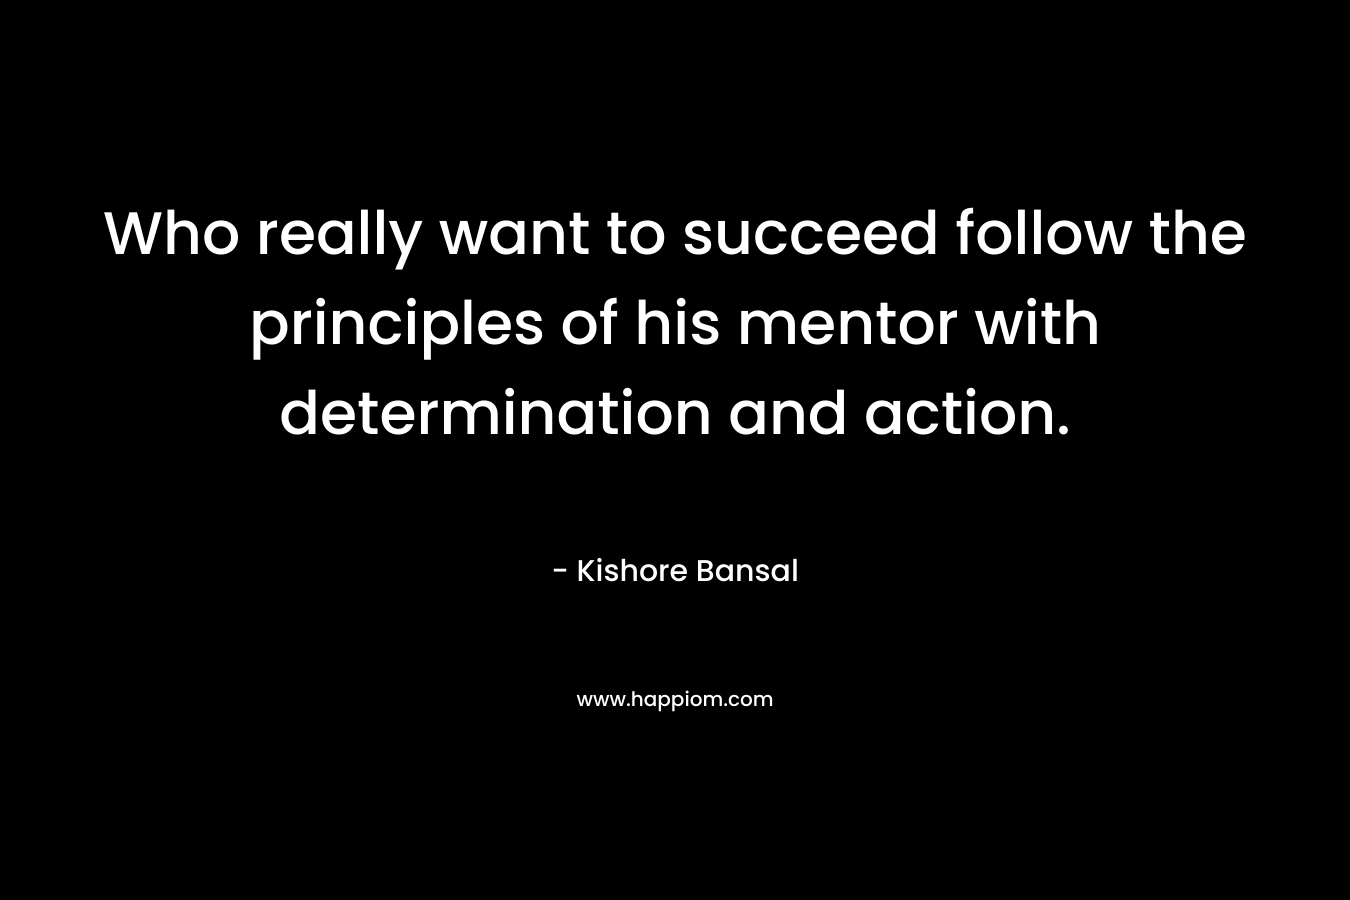 Who really want to succeed follow the principles of his mentor with determination and action.